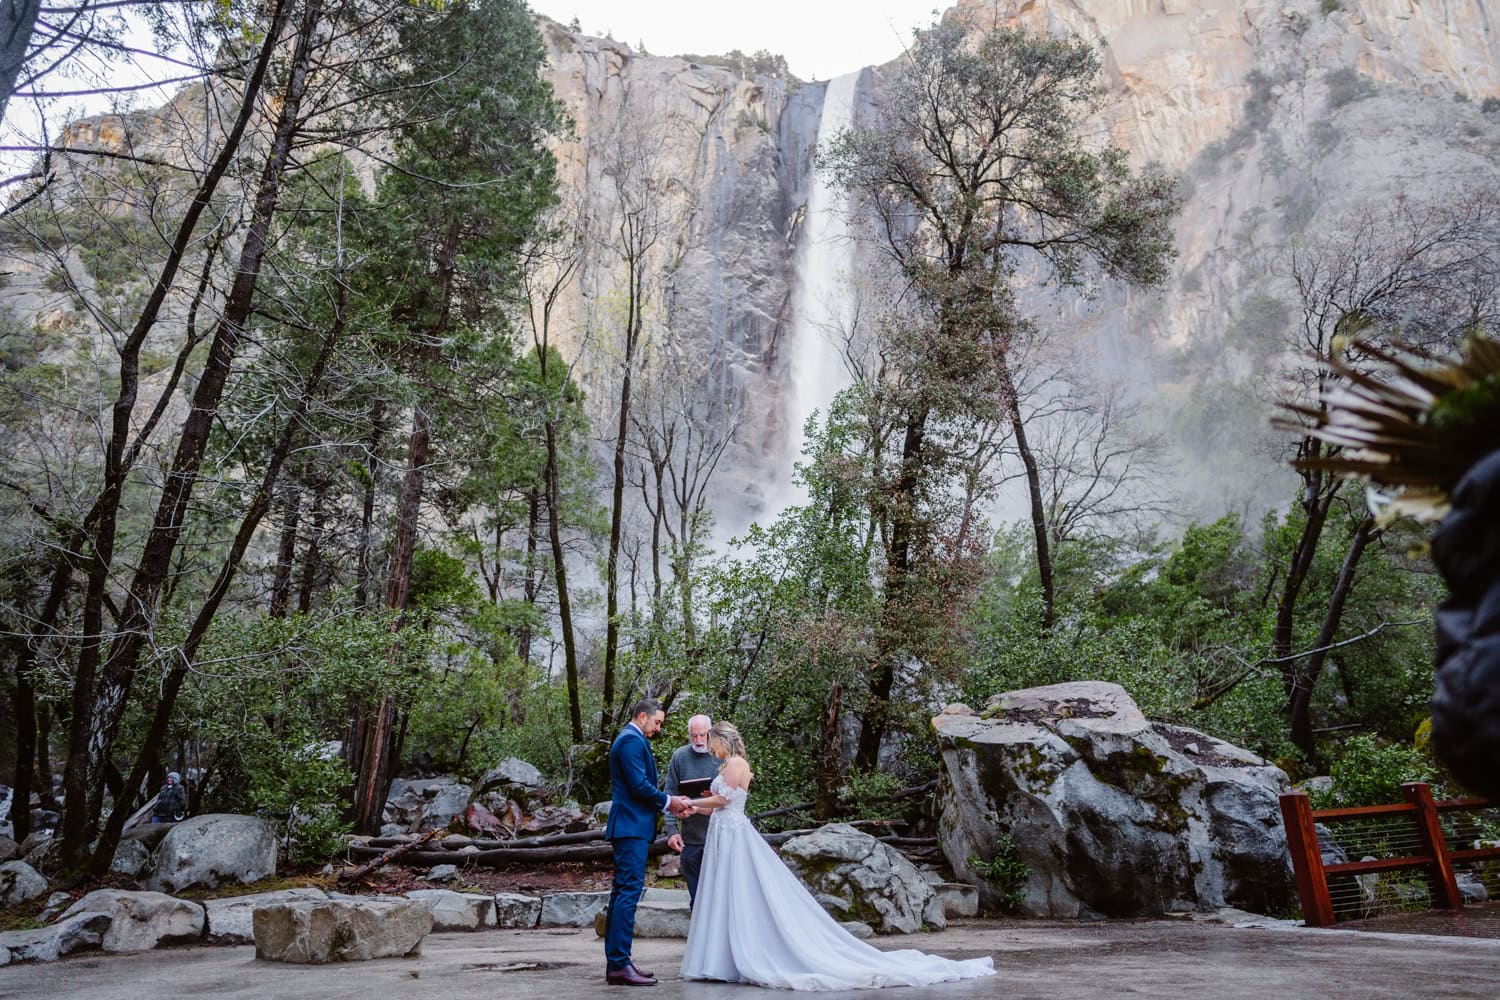 Couple getting married at Bridal Veil Falls in Yosemite.